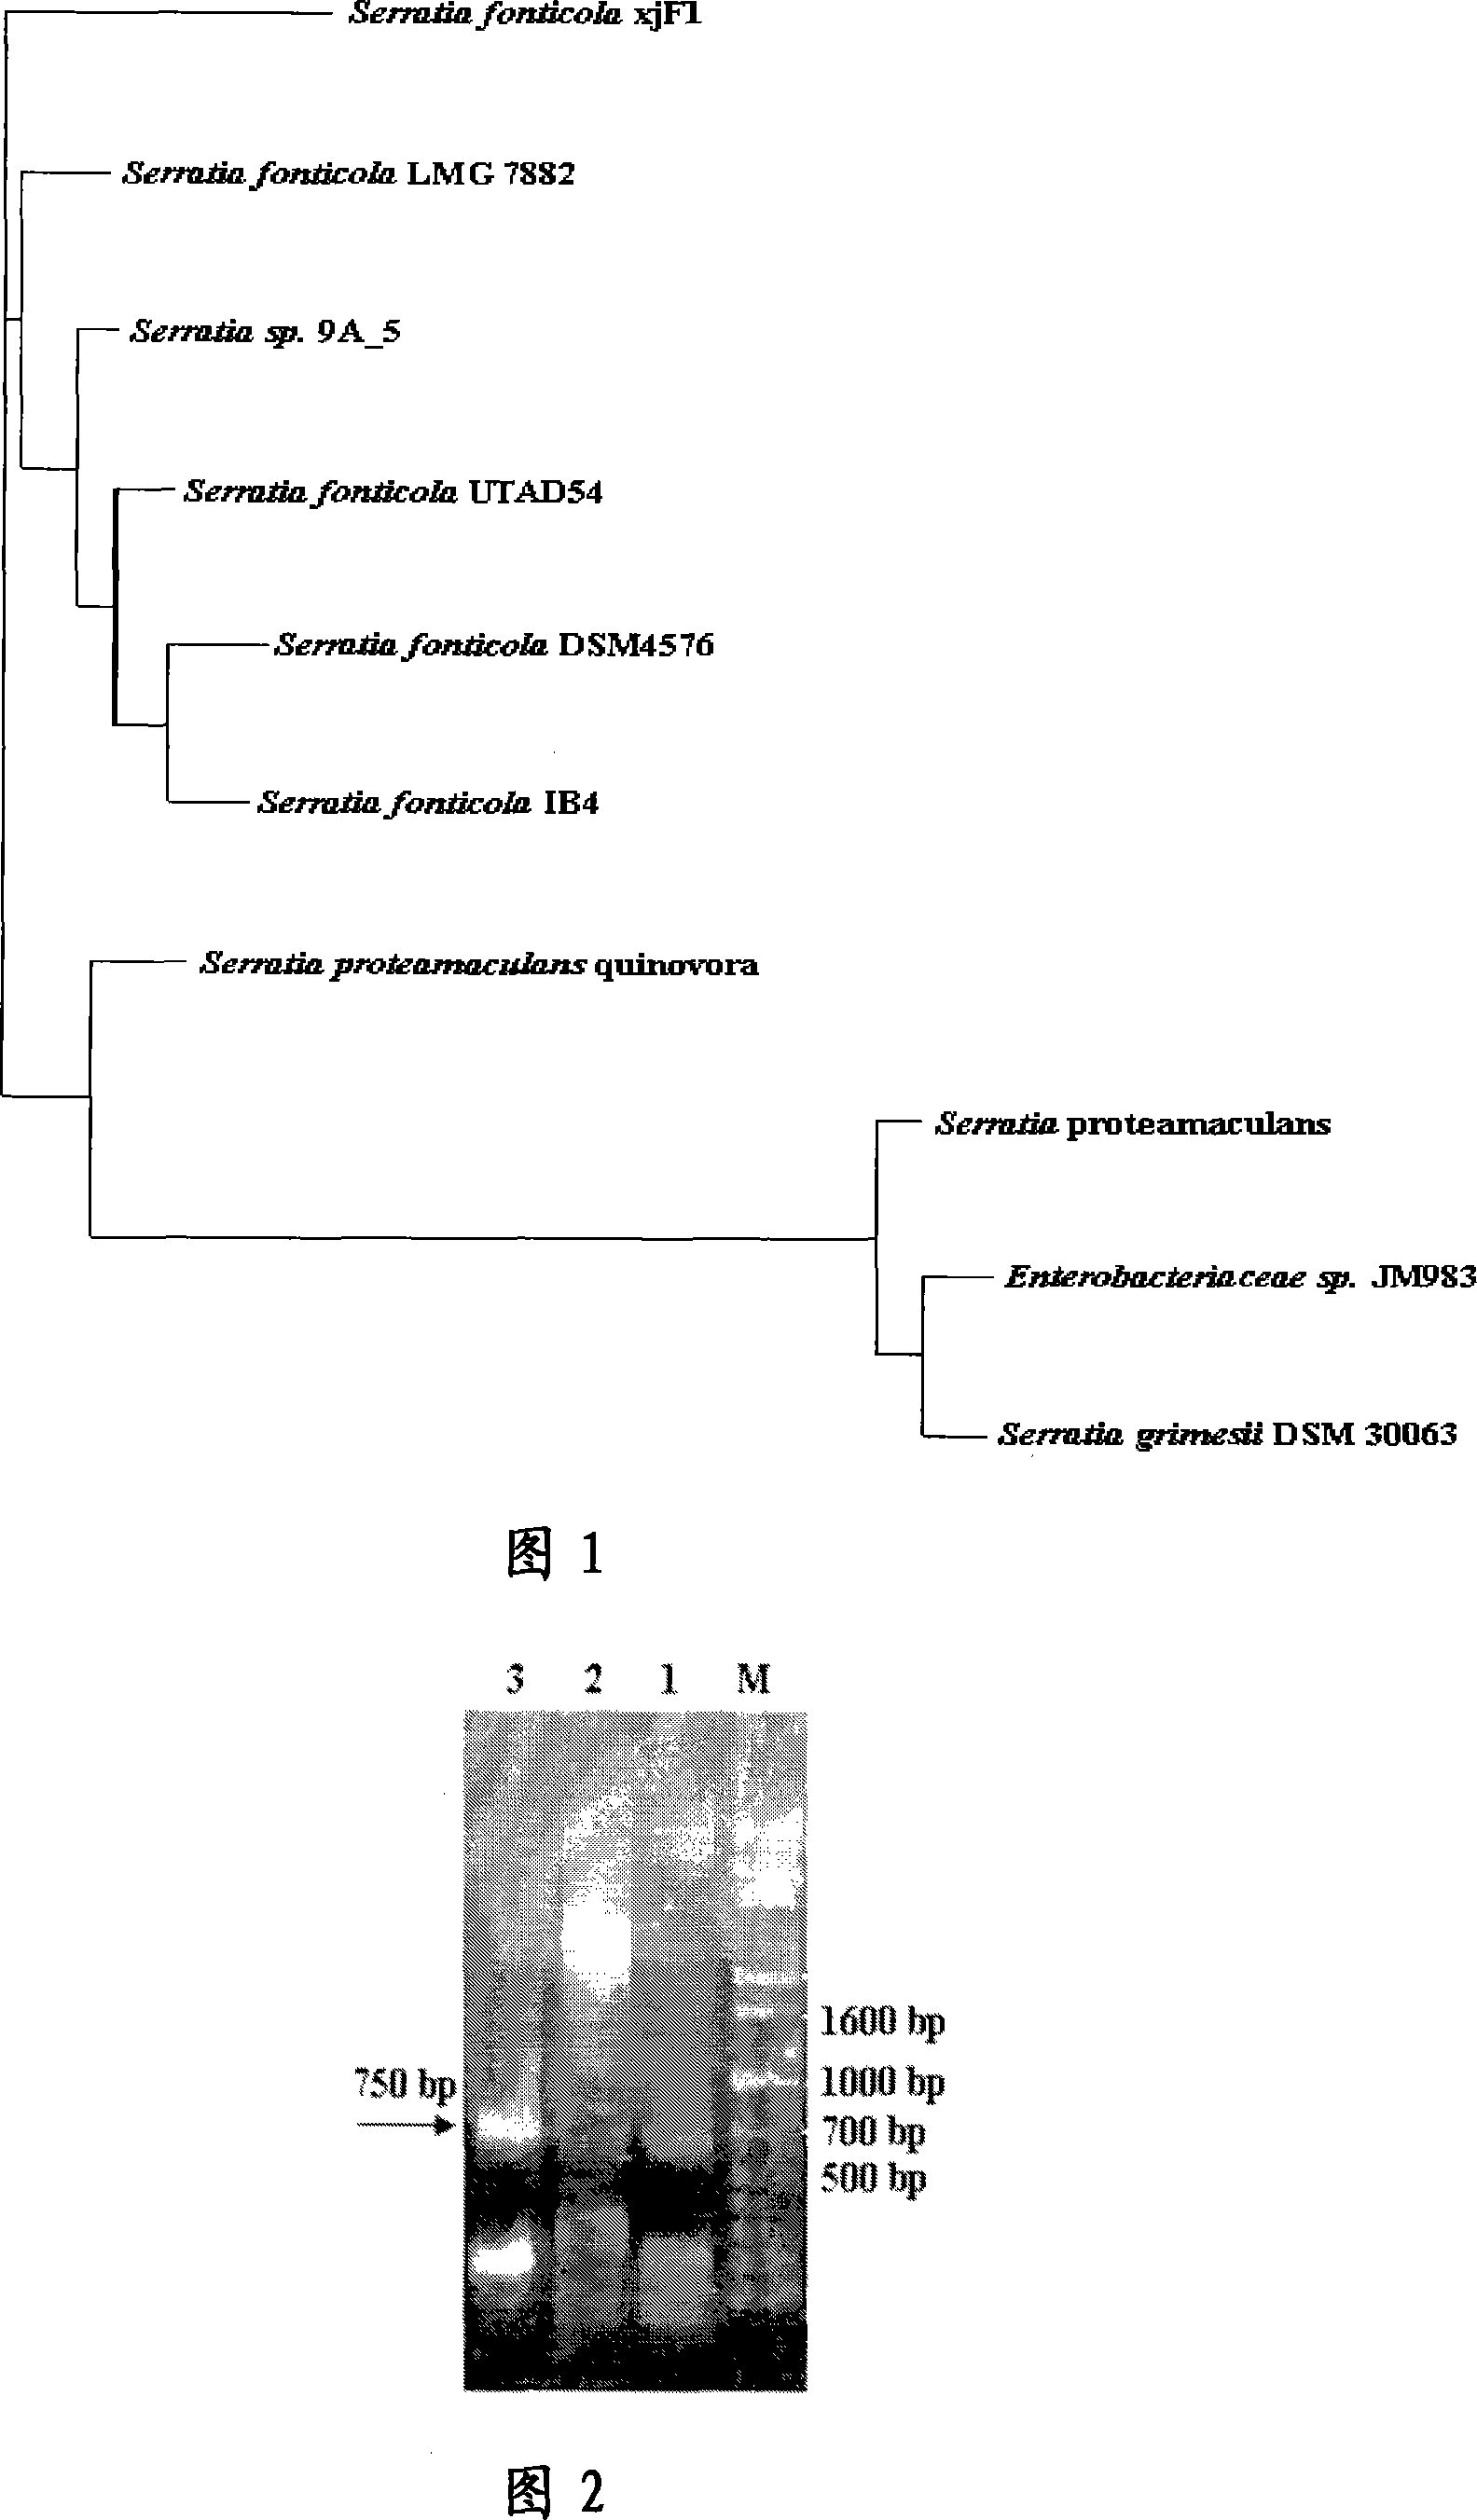 Low-temperature alkaline phosphatidase A1 and coding gene thereof